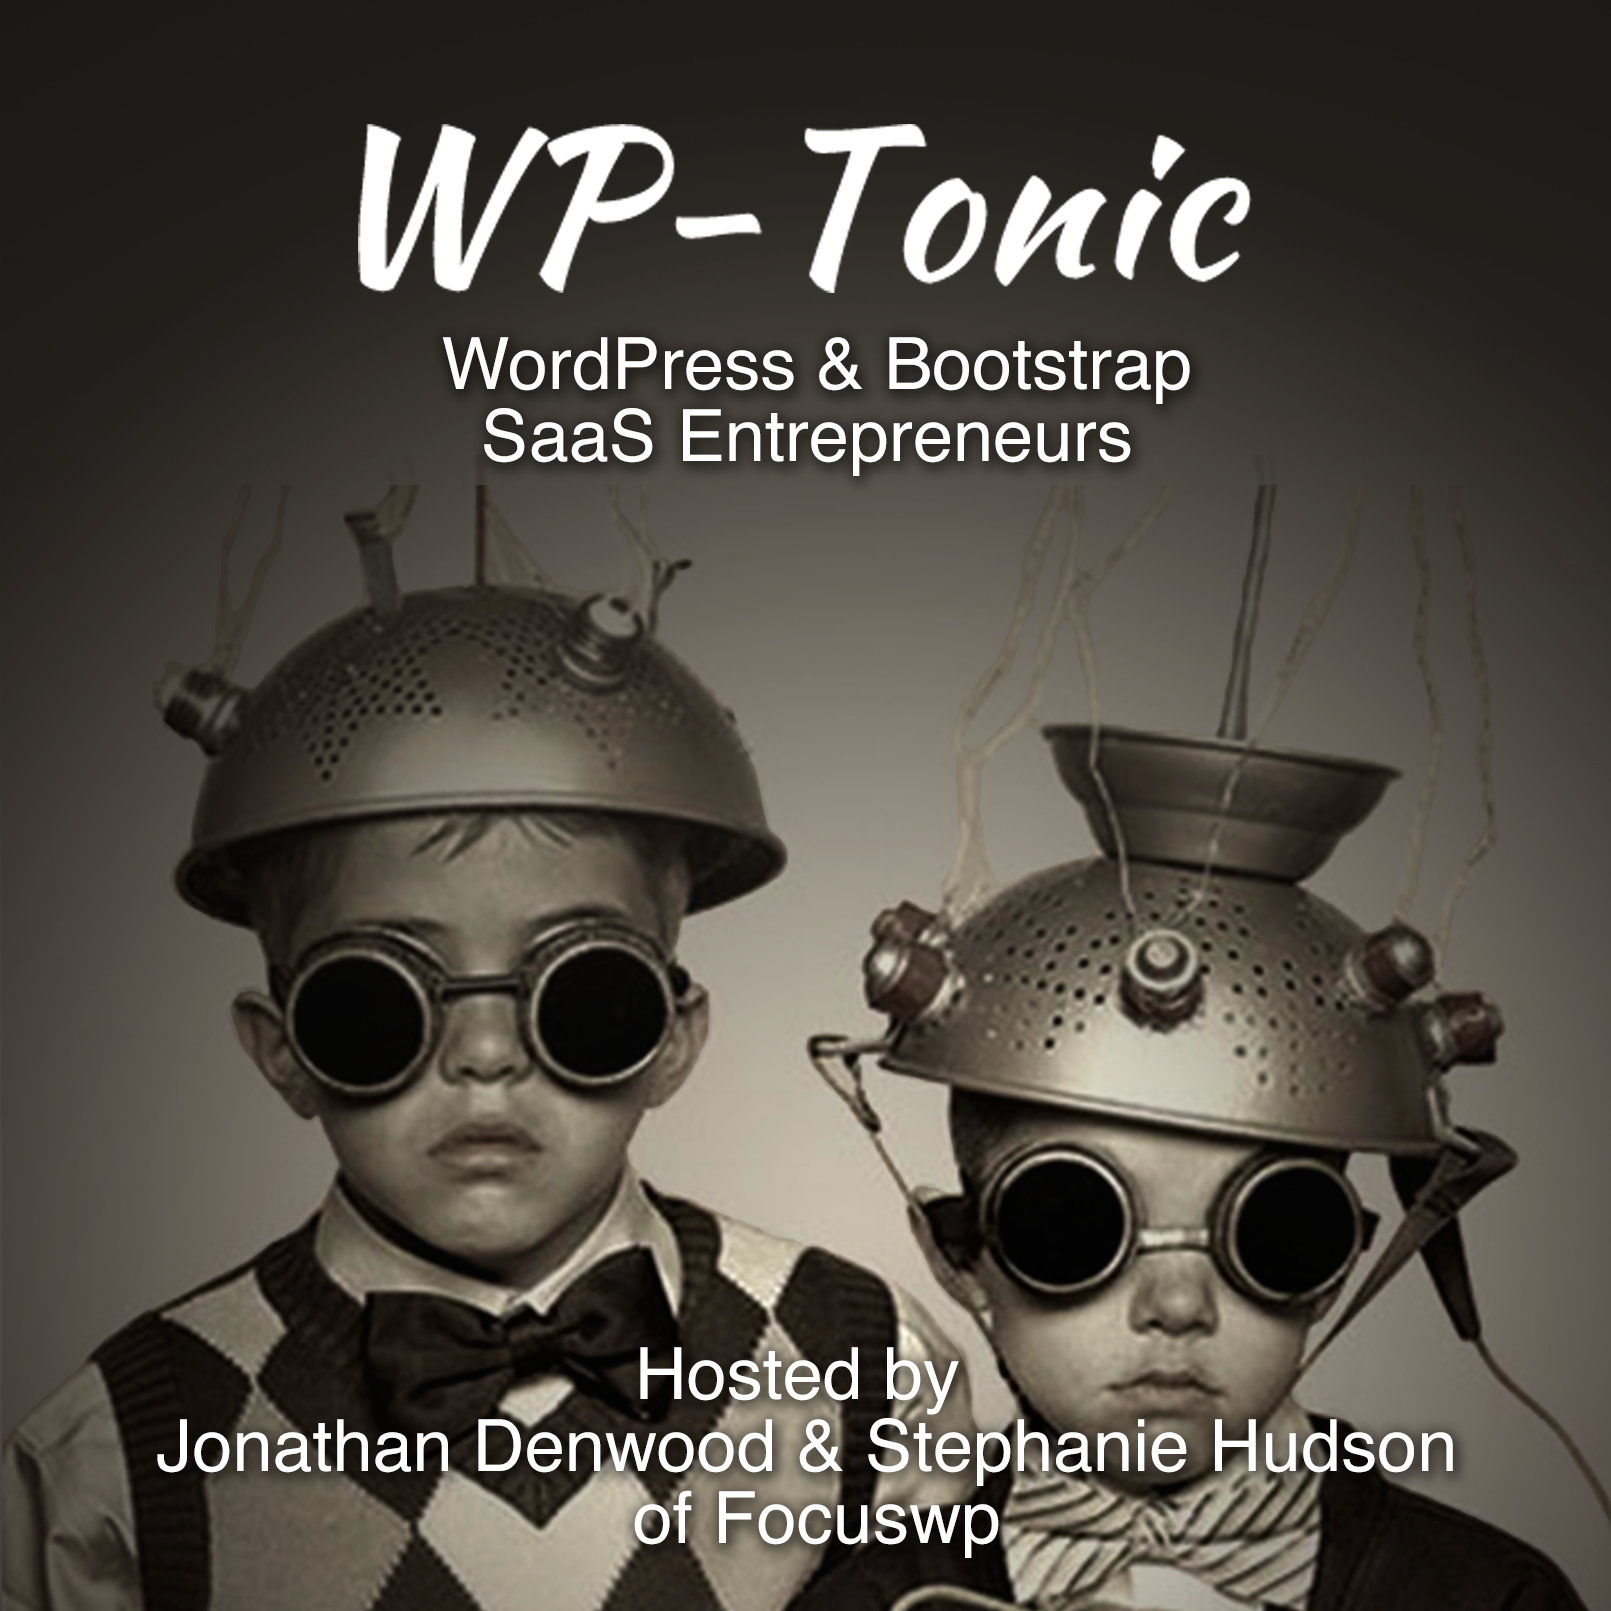 #463 WP-Tonic Round-Table Show on Friday 24th of January, 2020 at 8:30am PST